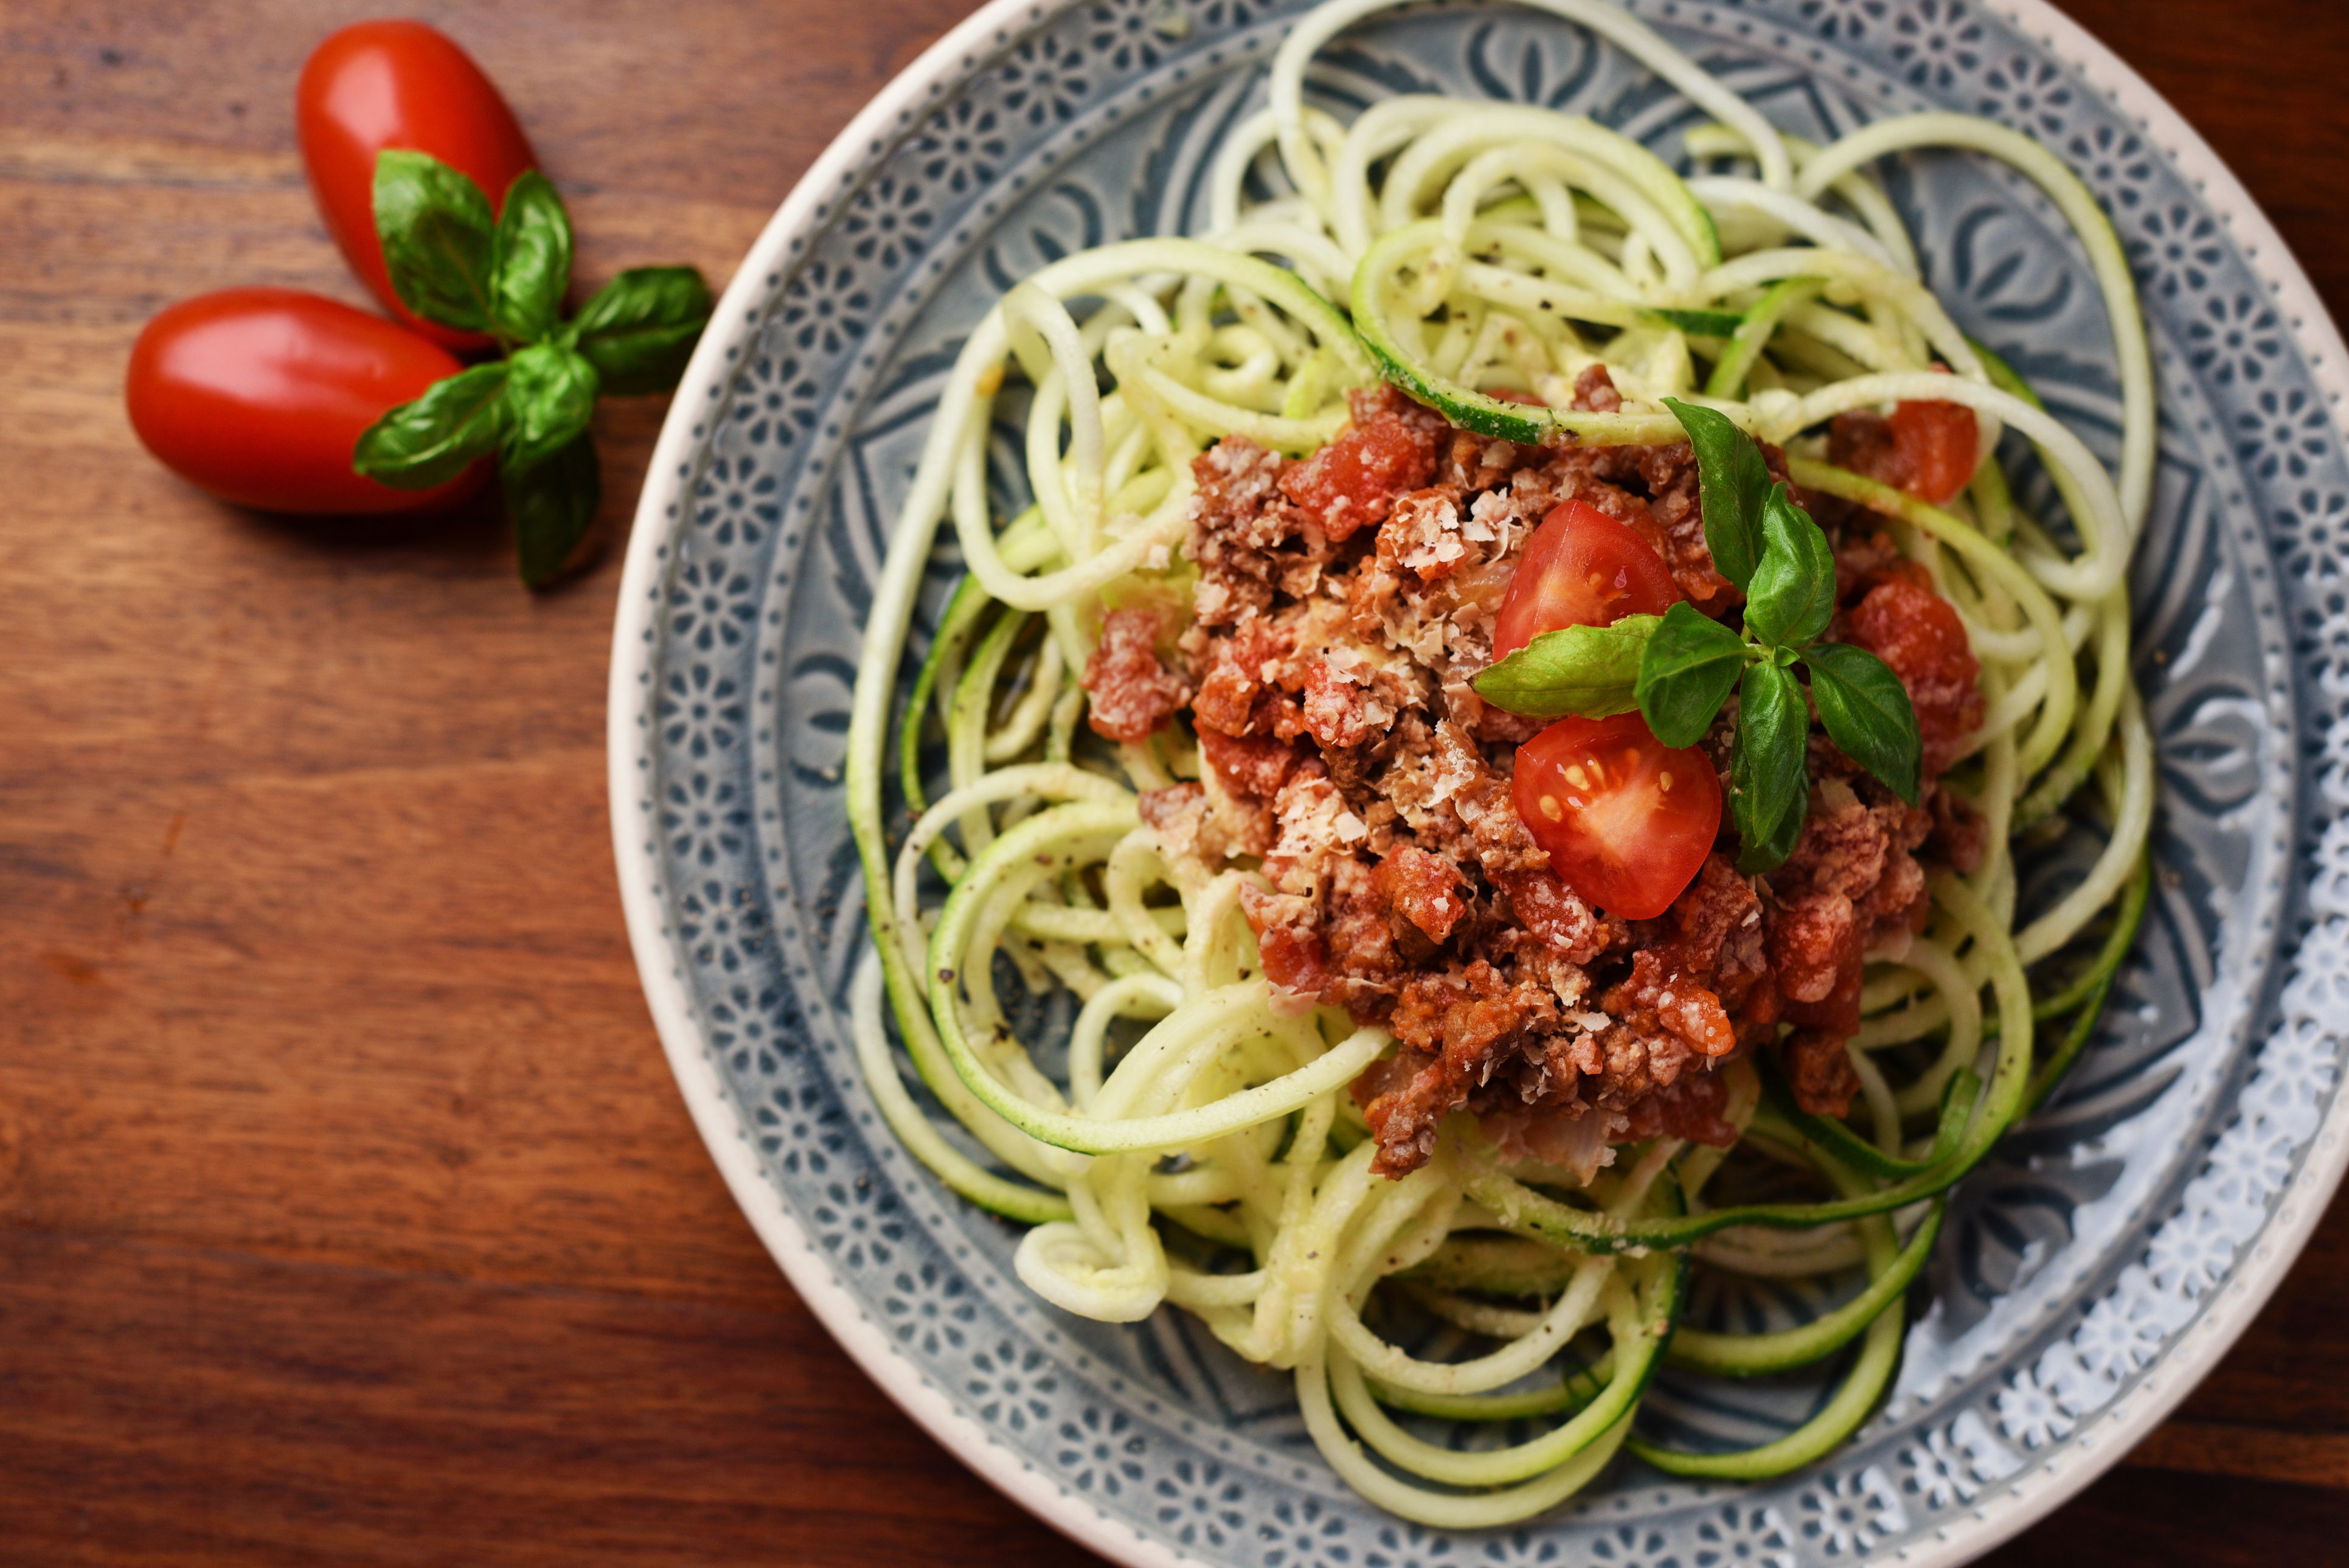 https://hips.hearstapps.com/hmg-prod/images/zoodles-with-vegan-bolognese-and-yeast-flakes-royalty-free-image-495879598-1532632447.jpg